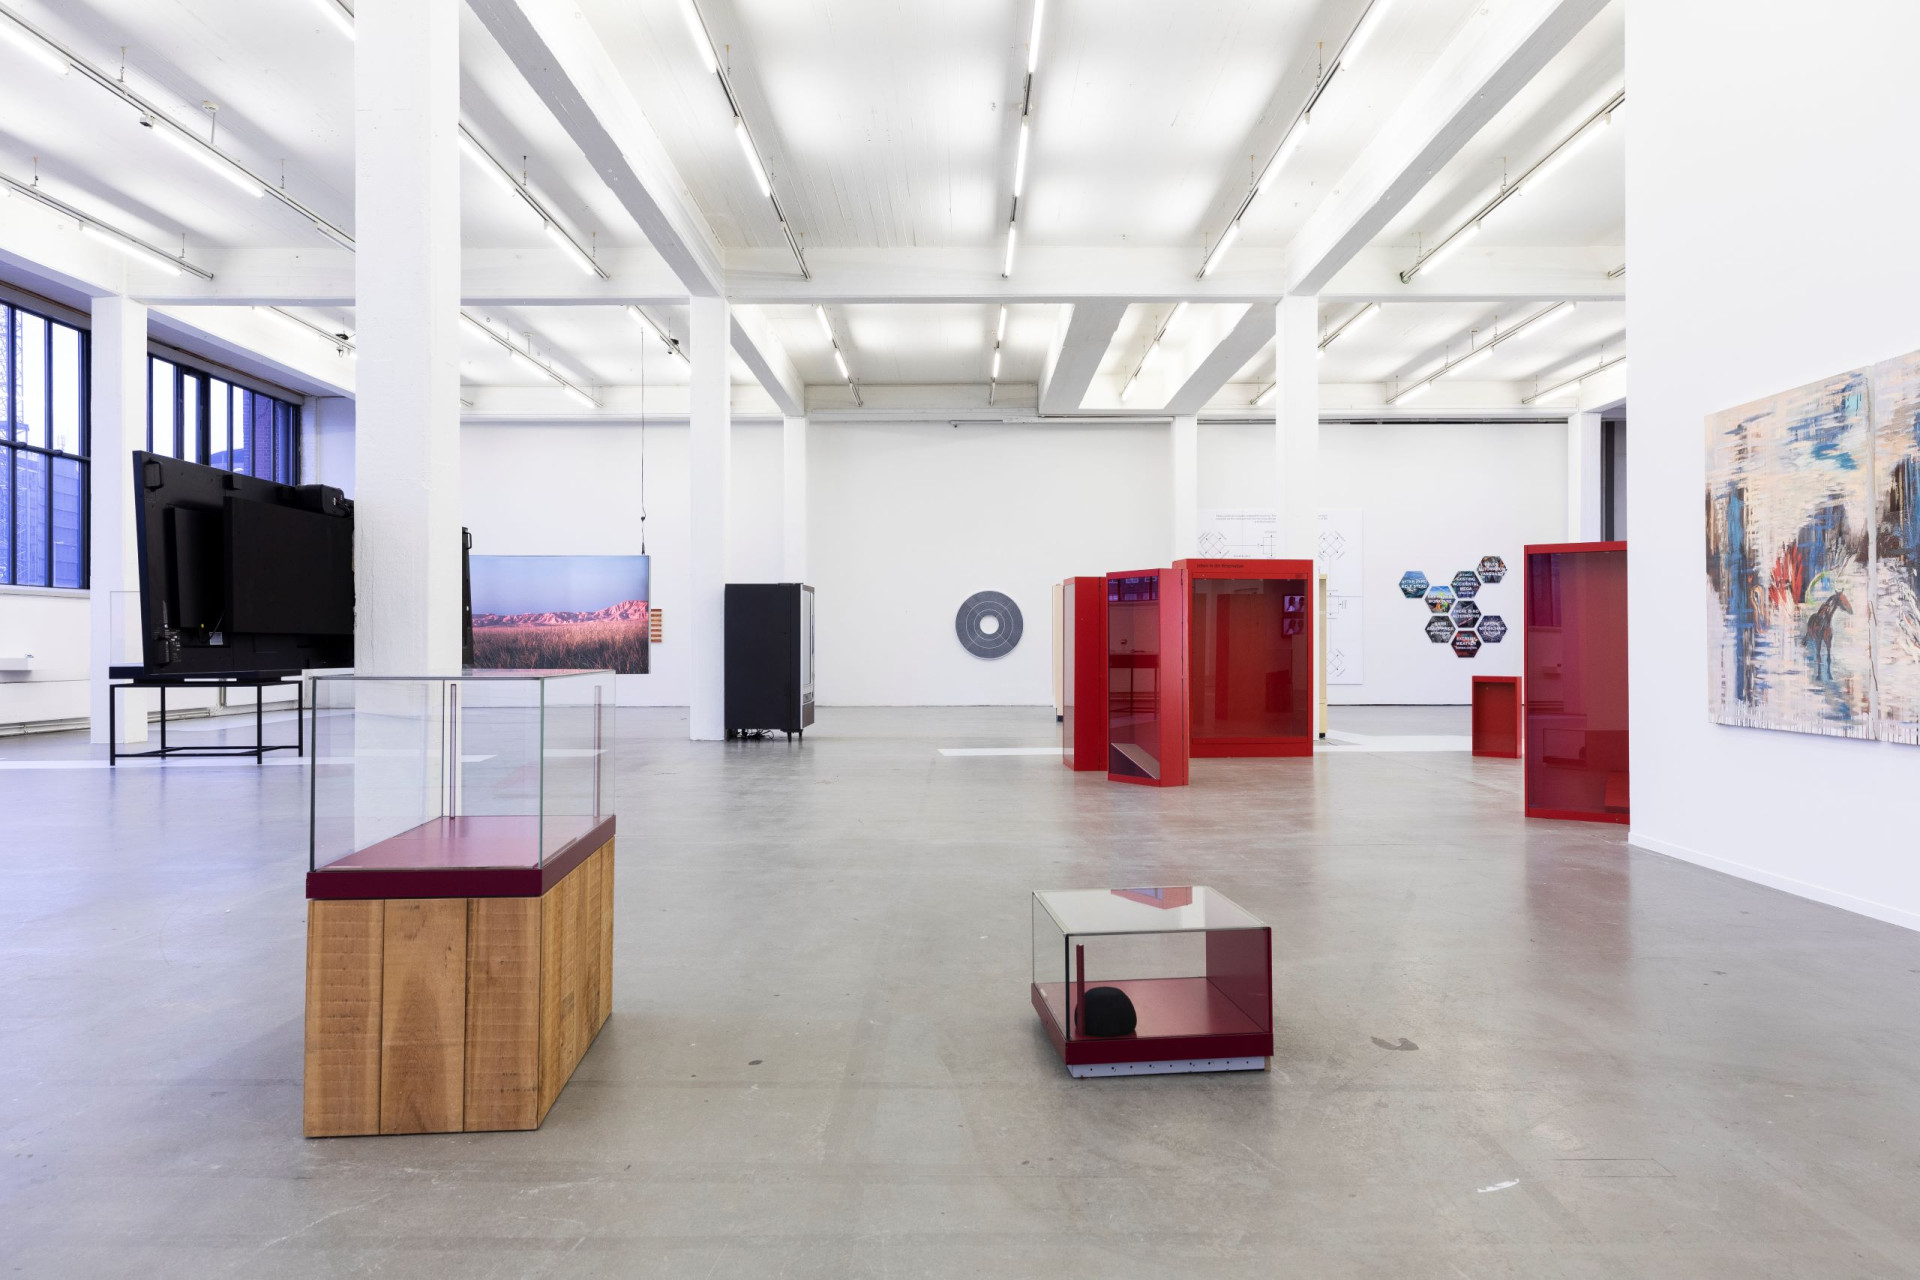 A view of an exhibition where various vitrines and metallic, boxlike sculptures occupy a spacious, airy gallery